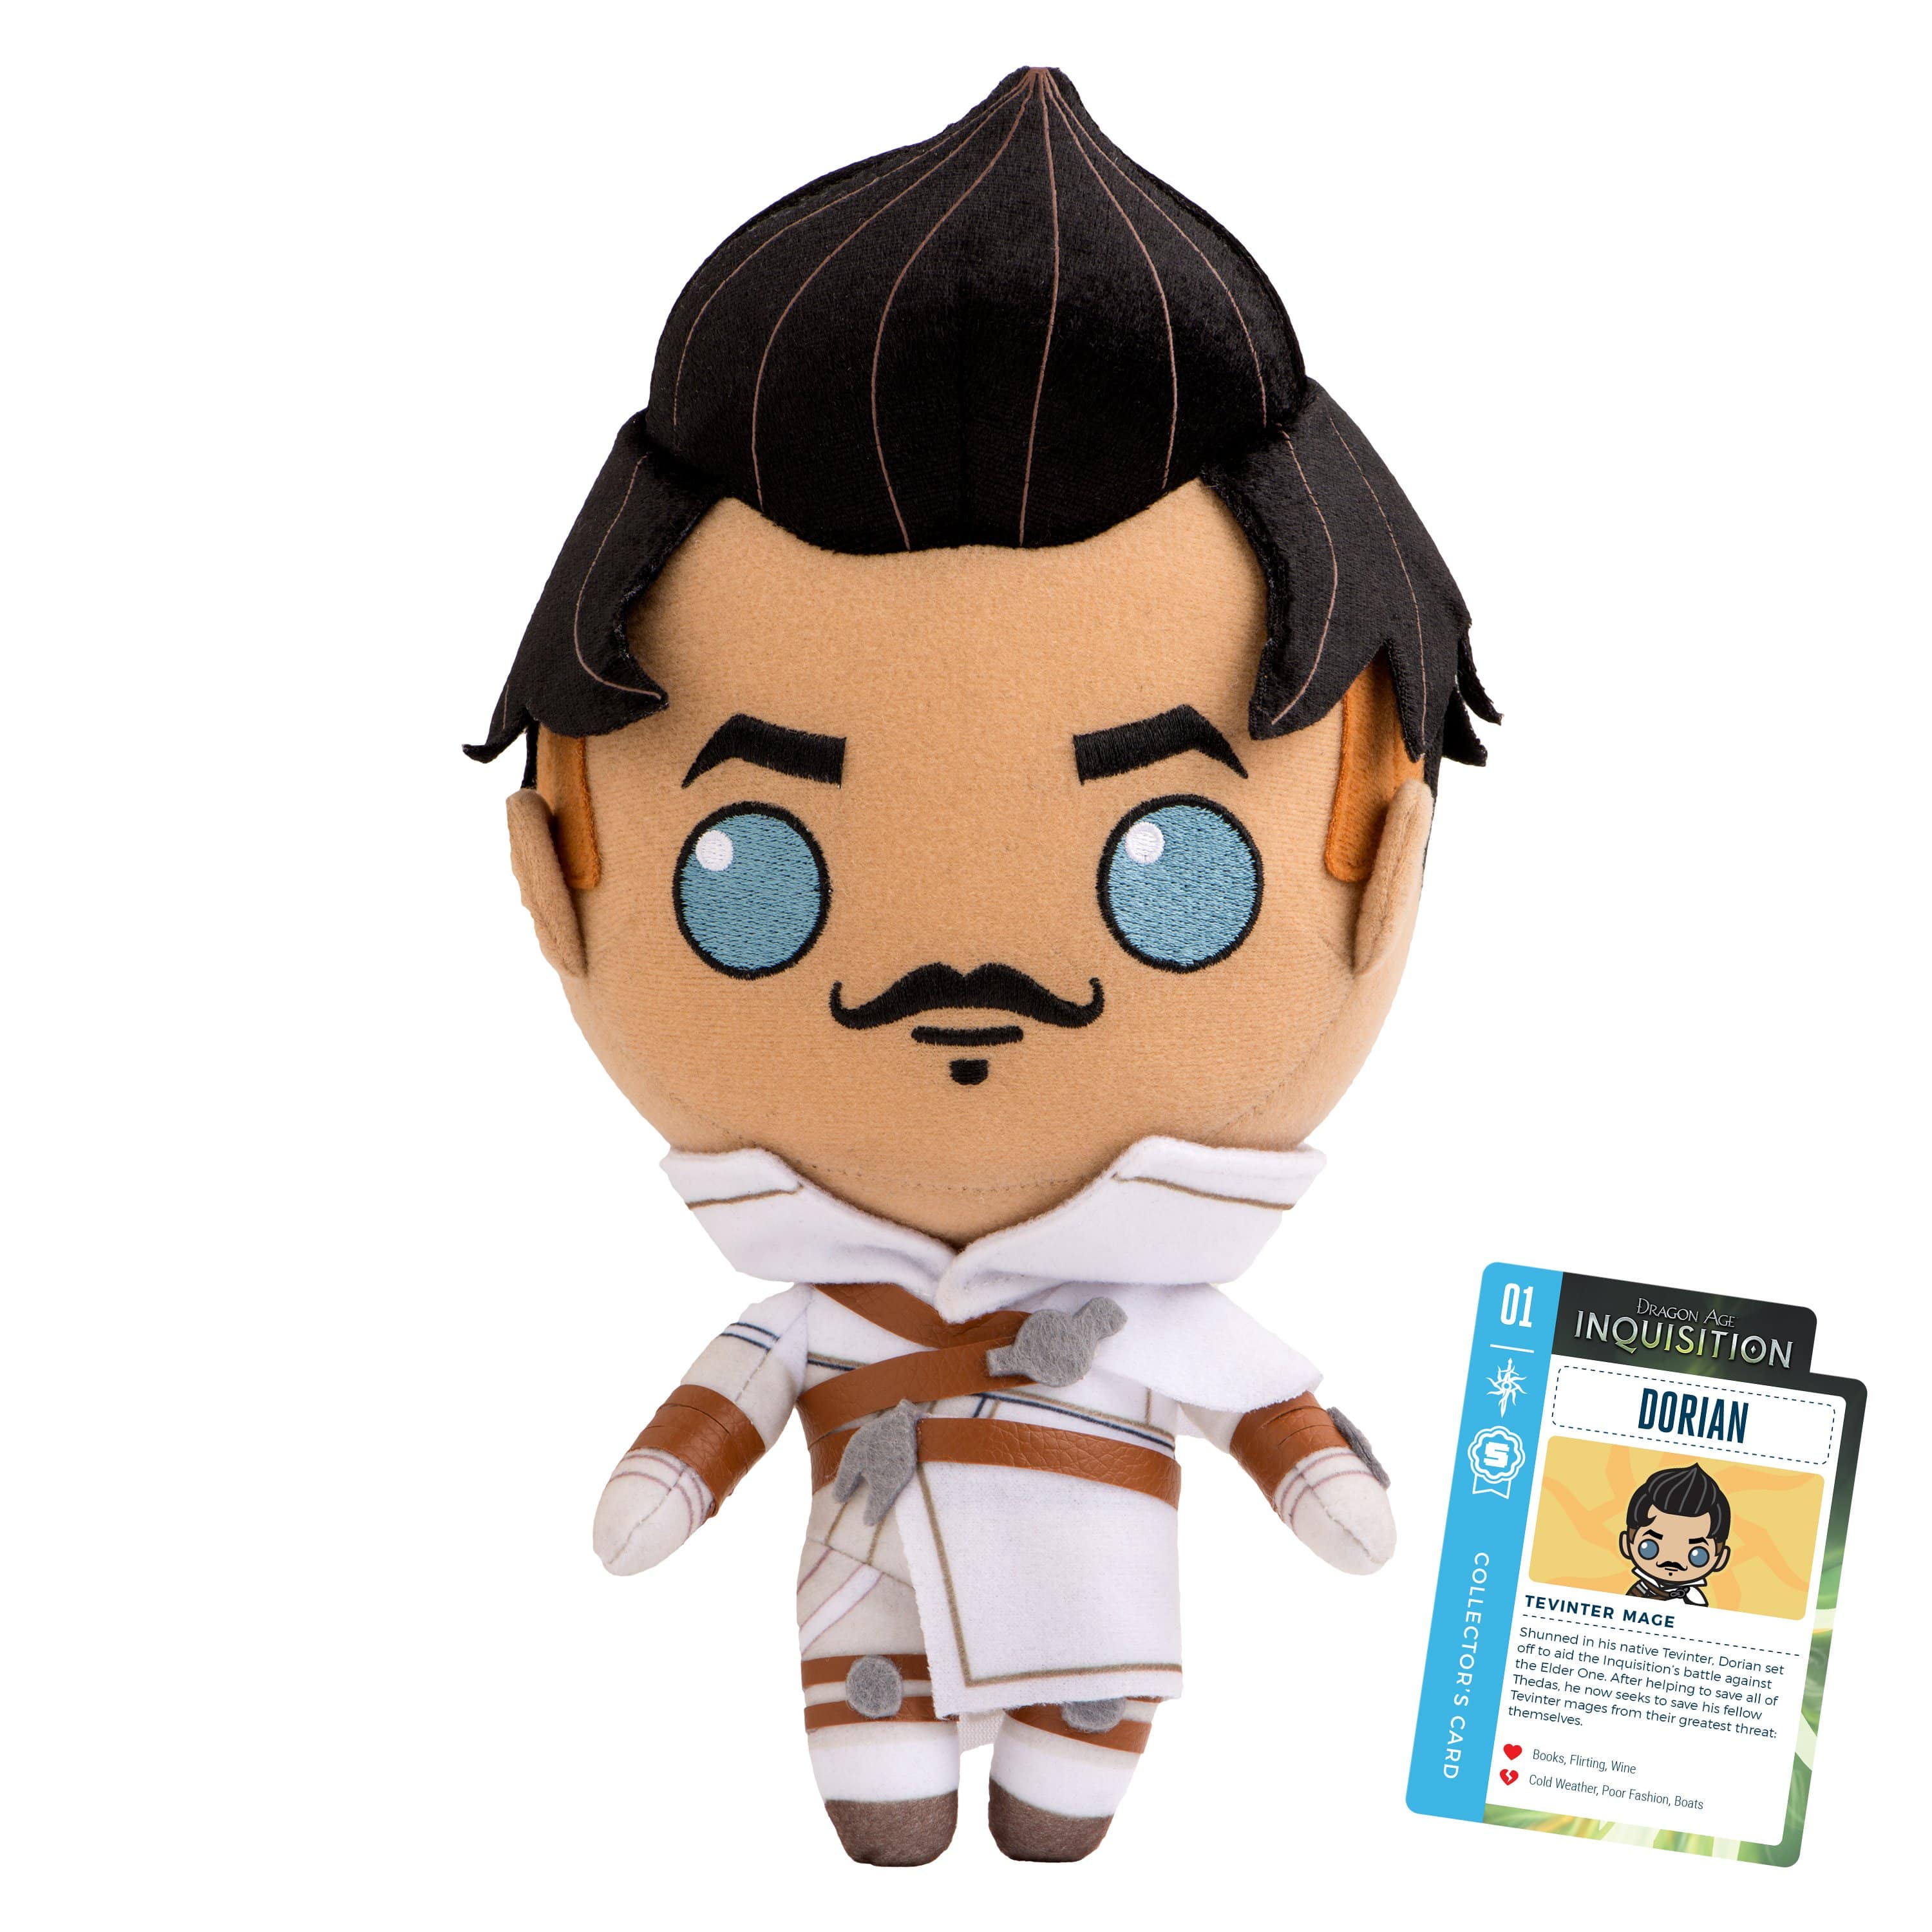 Dragon Age: Inquisition - 10" Dorian Collector's Stuffed Plush Toy With Collector's Card